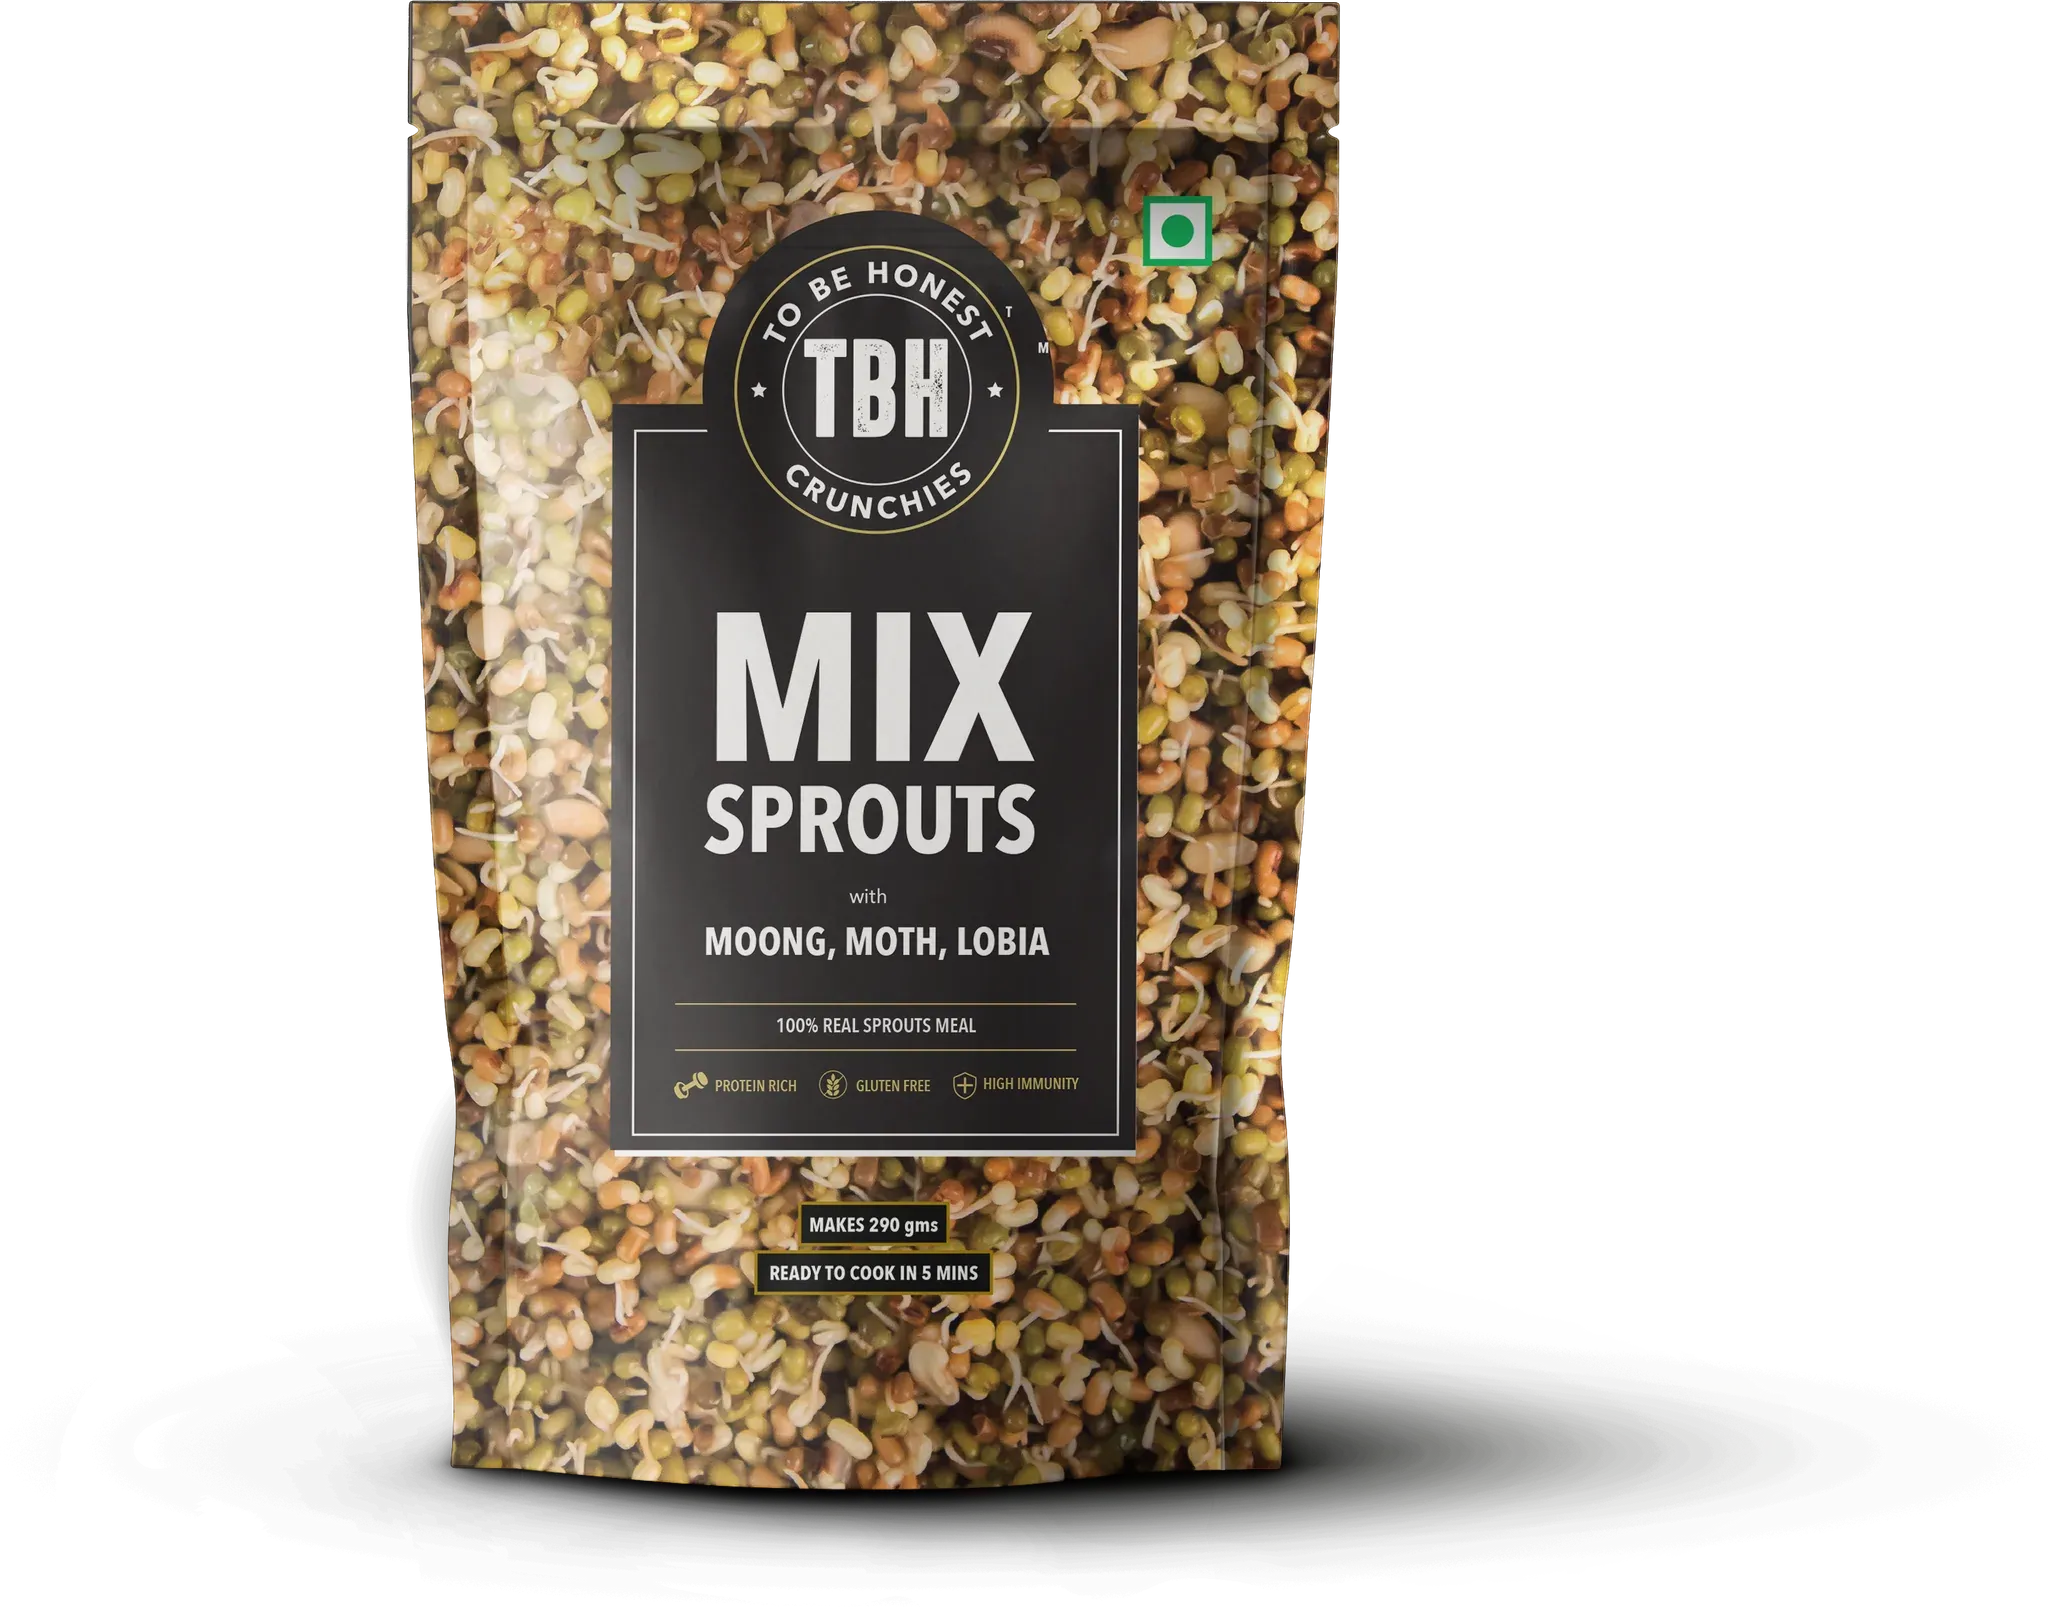 TBH Mix Sprouts with Moong Moth Lobia Image